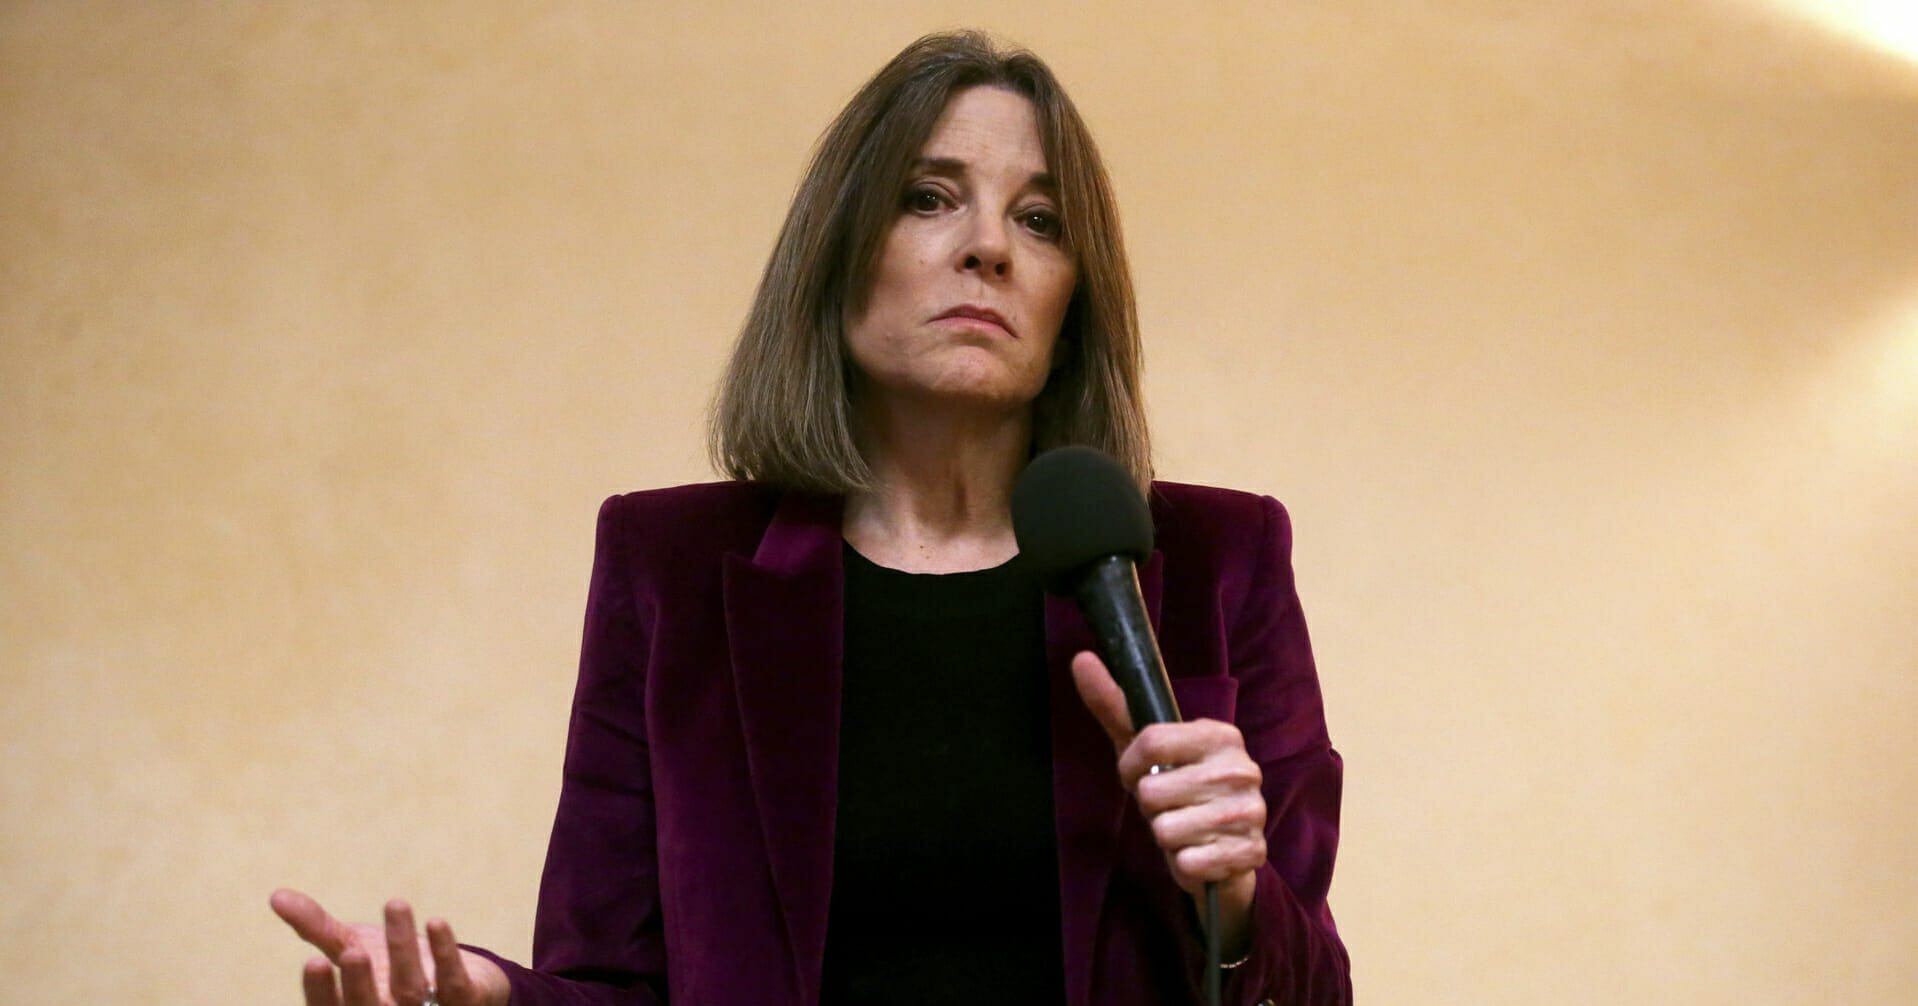 Presidential candidate Marianne Williamson speaks at a campaign stop at Body and Soul Wellness Center in Dubuque, Iowa, on Nov. 30, 2019.